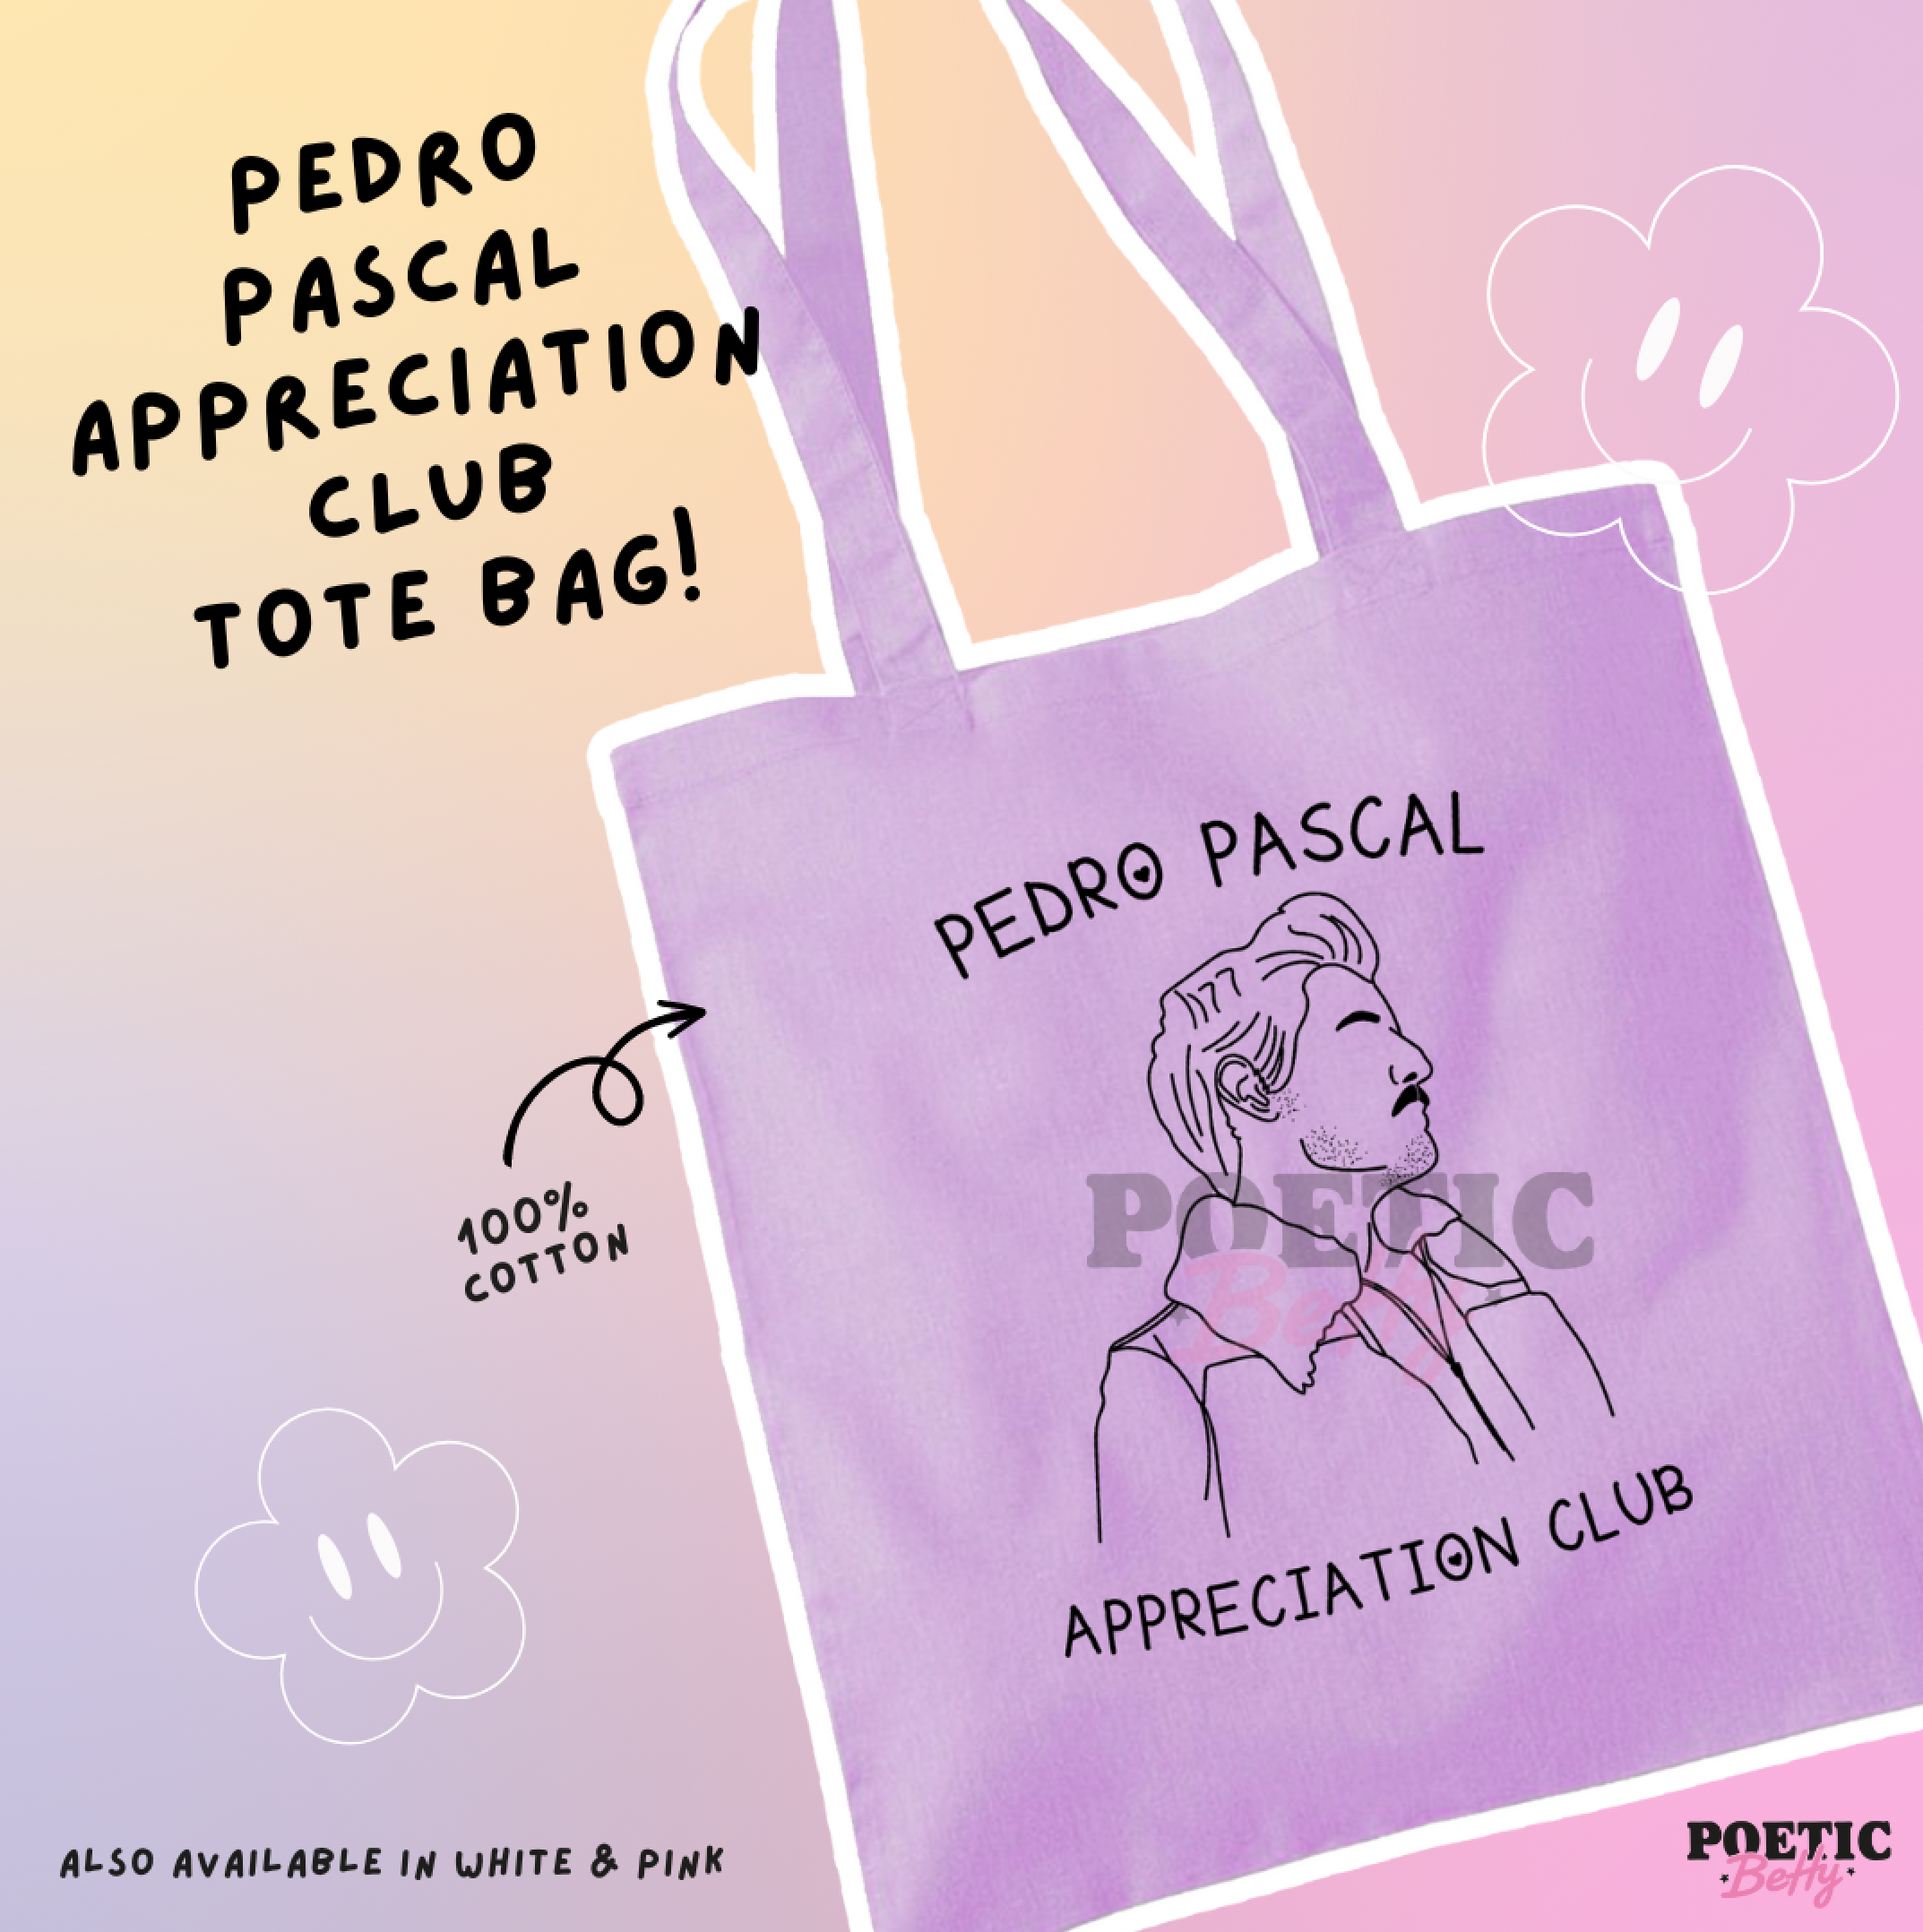  WZMPA Funny Pedro Tote Bag Pedro Fans Gift Daddy Is A